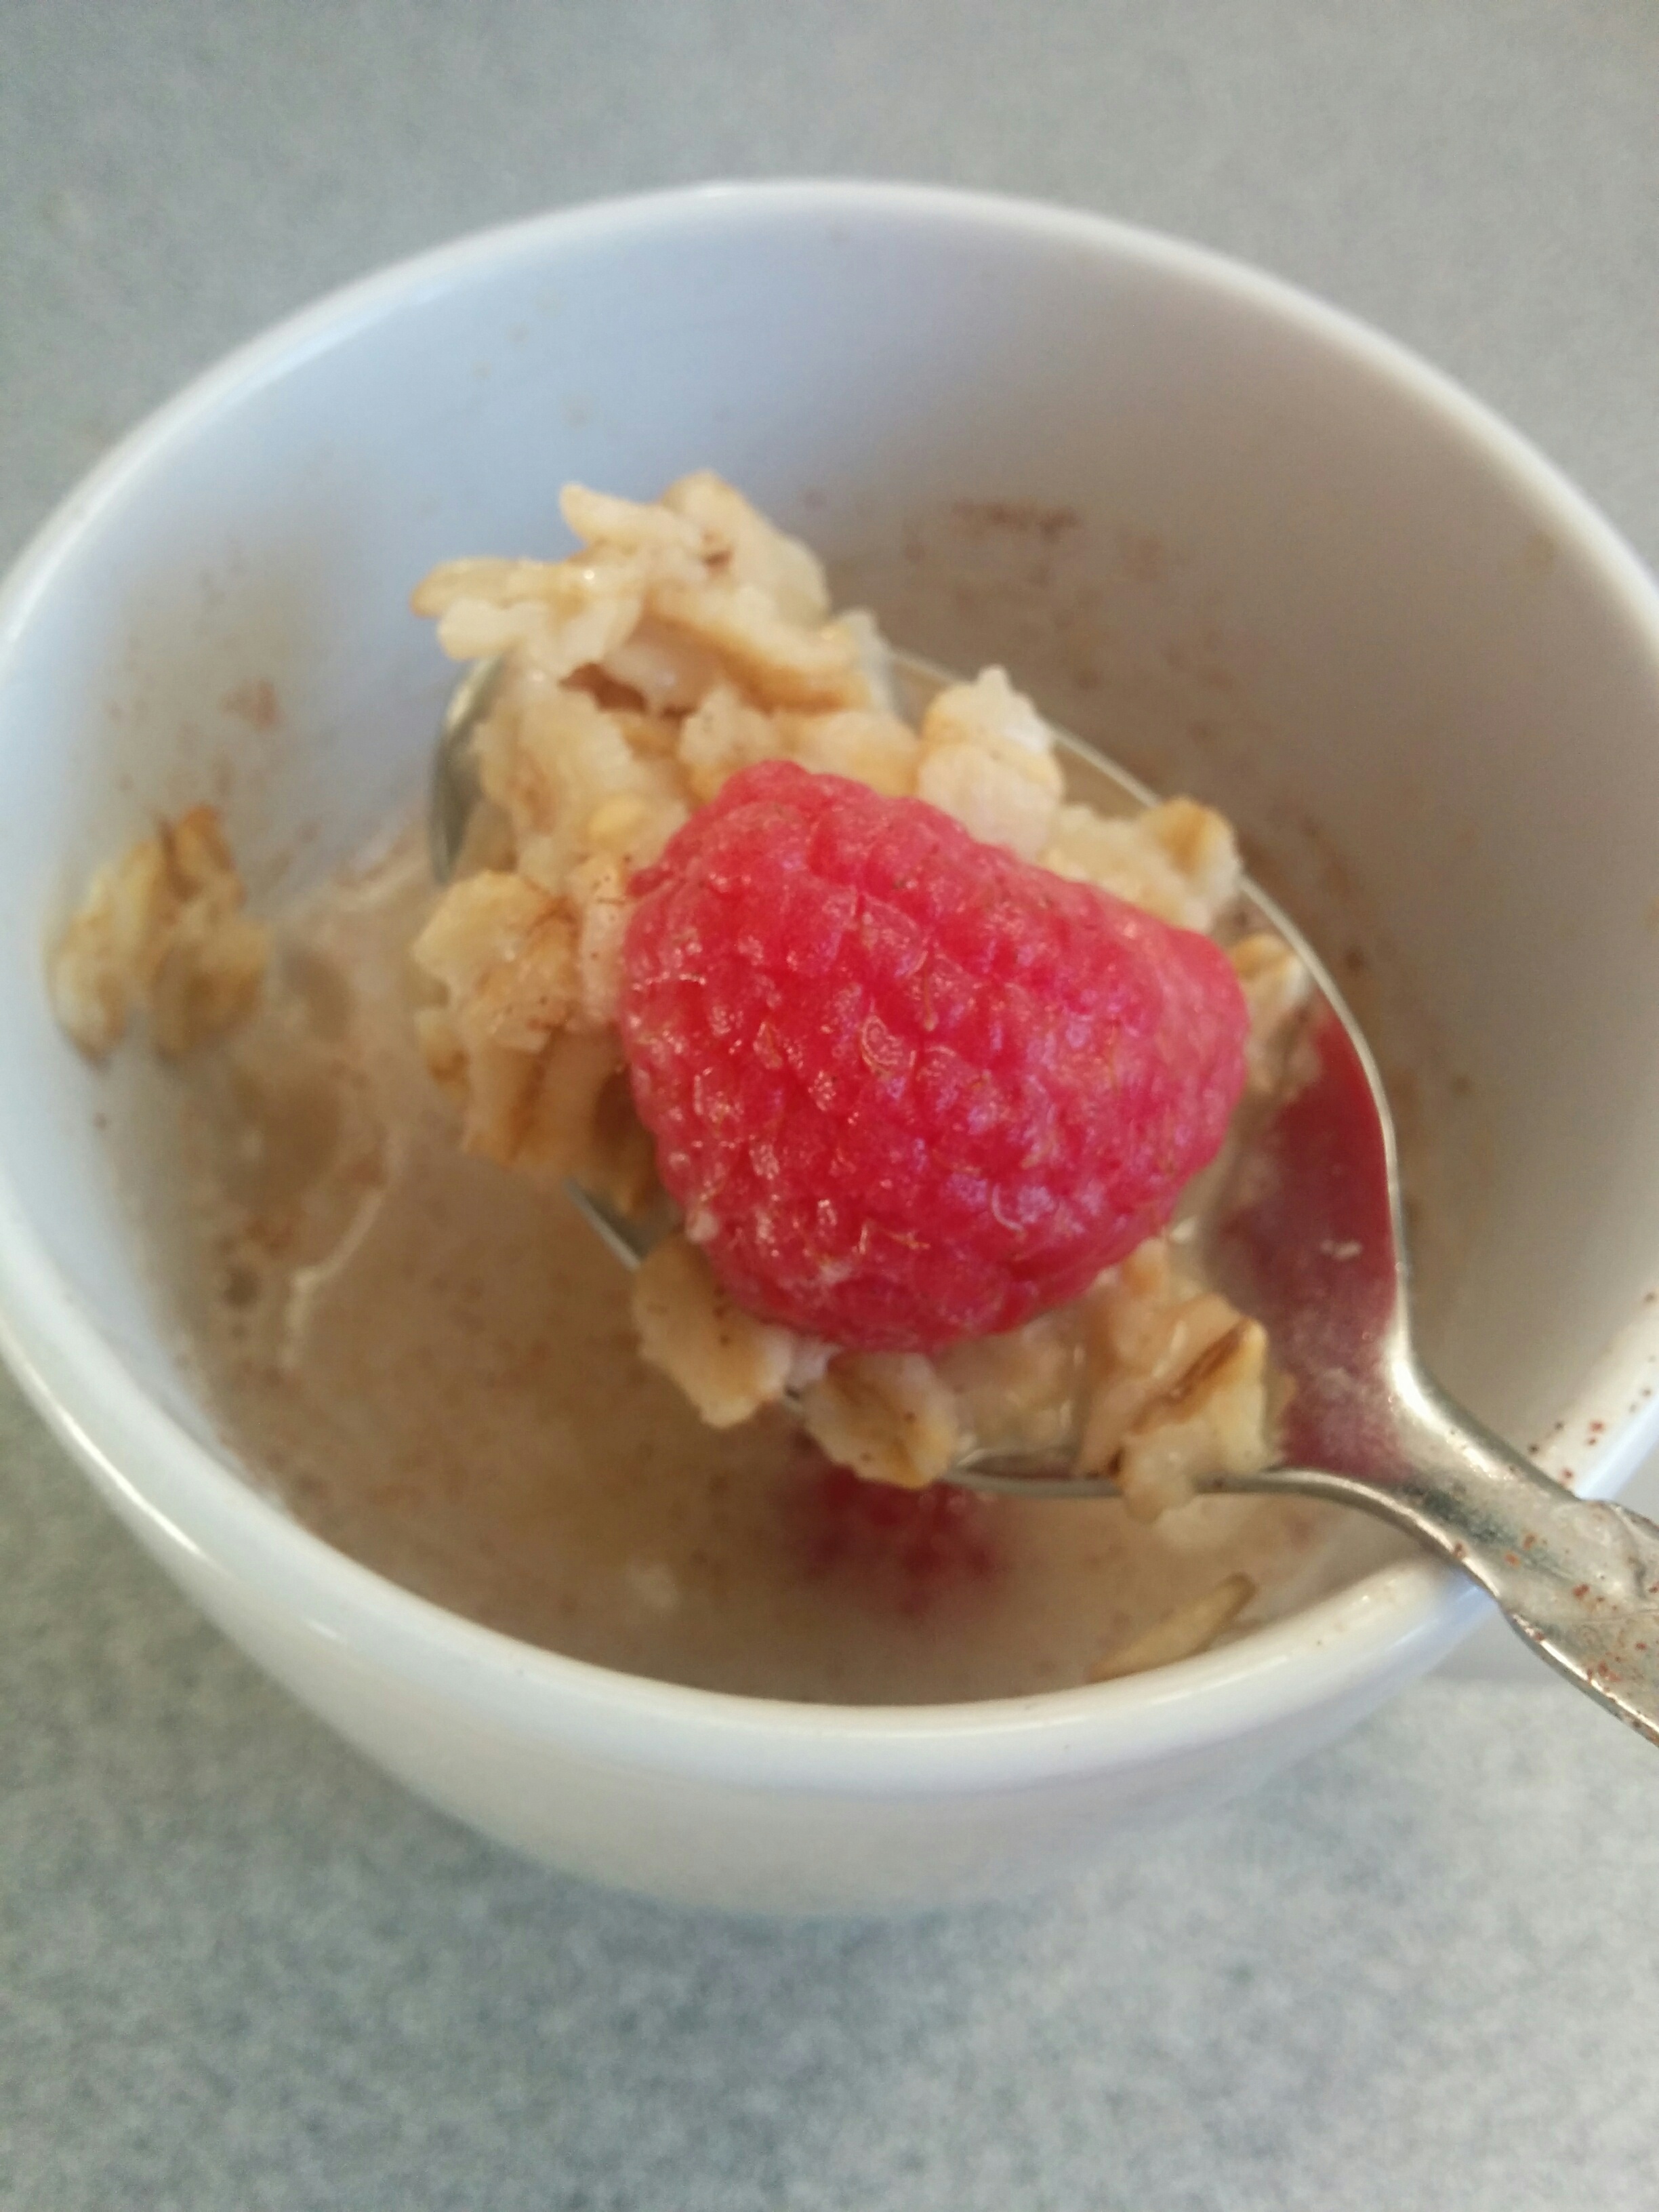 Quick-and-Easy Almond Milk Oatmeal with Raspberries